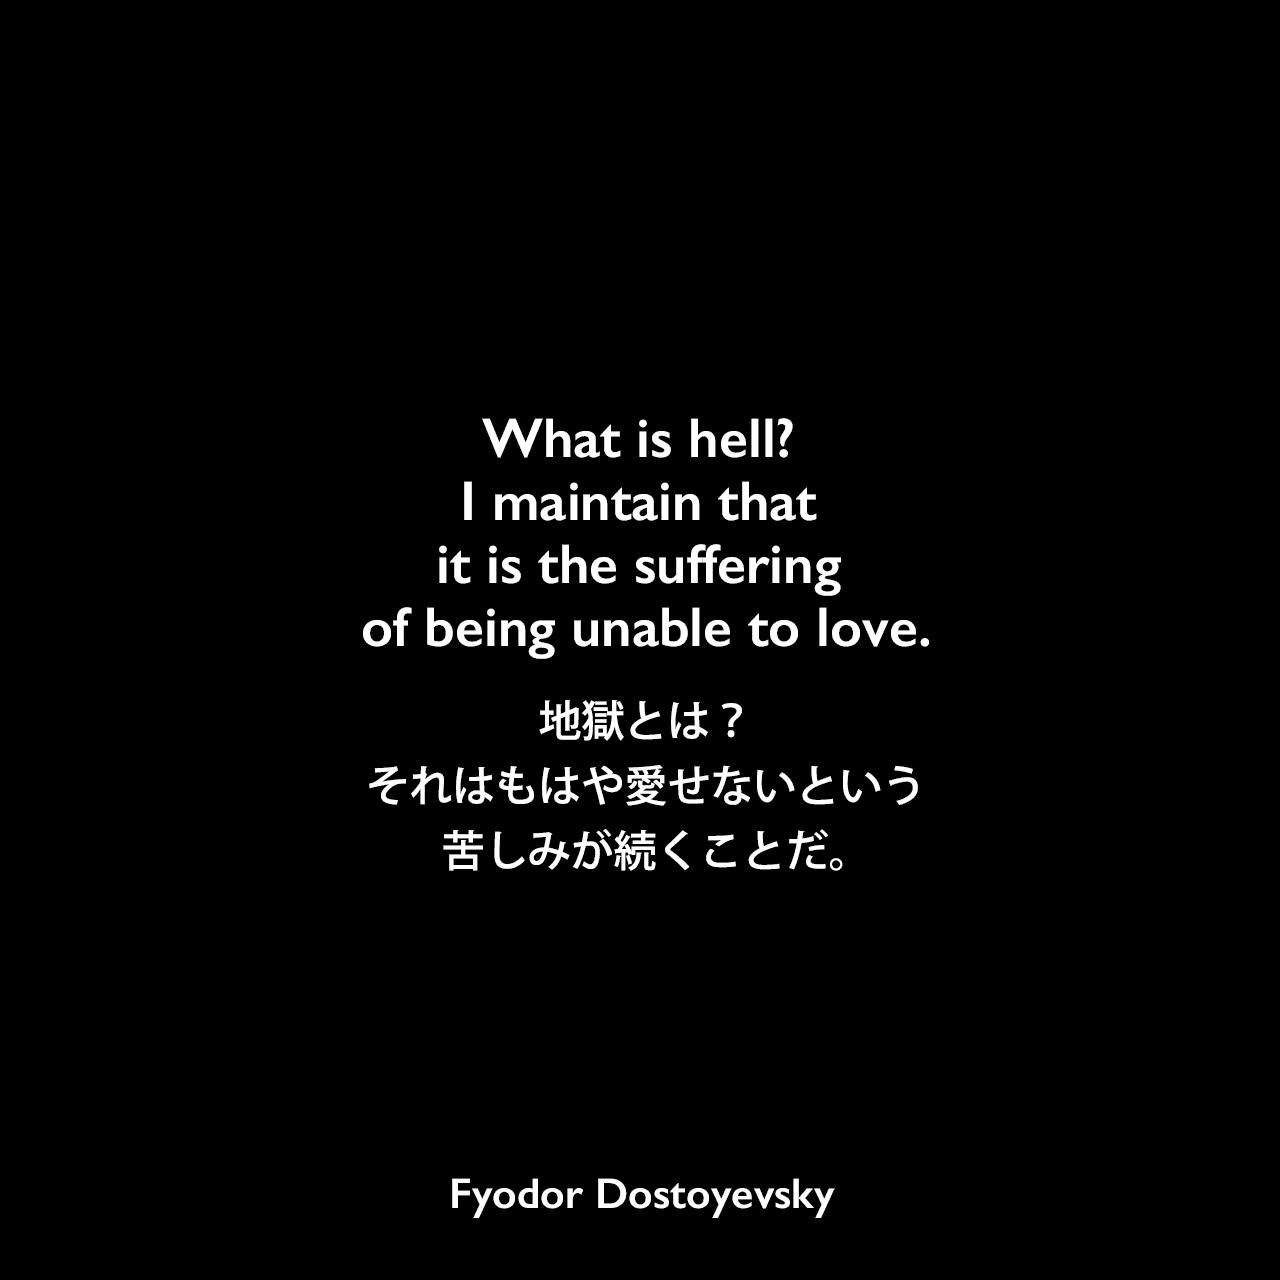 What is hell? I maintain that it is the suffering of being unable to love.地獄とは？それはもはや愛せないという苦しみが続くことだ。- ドストエフキーの小説「カラマーゾフの兄弟」よりFyodor Dostoyevsky